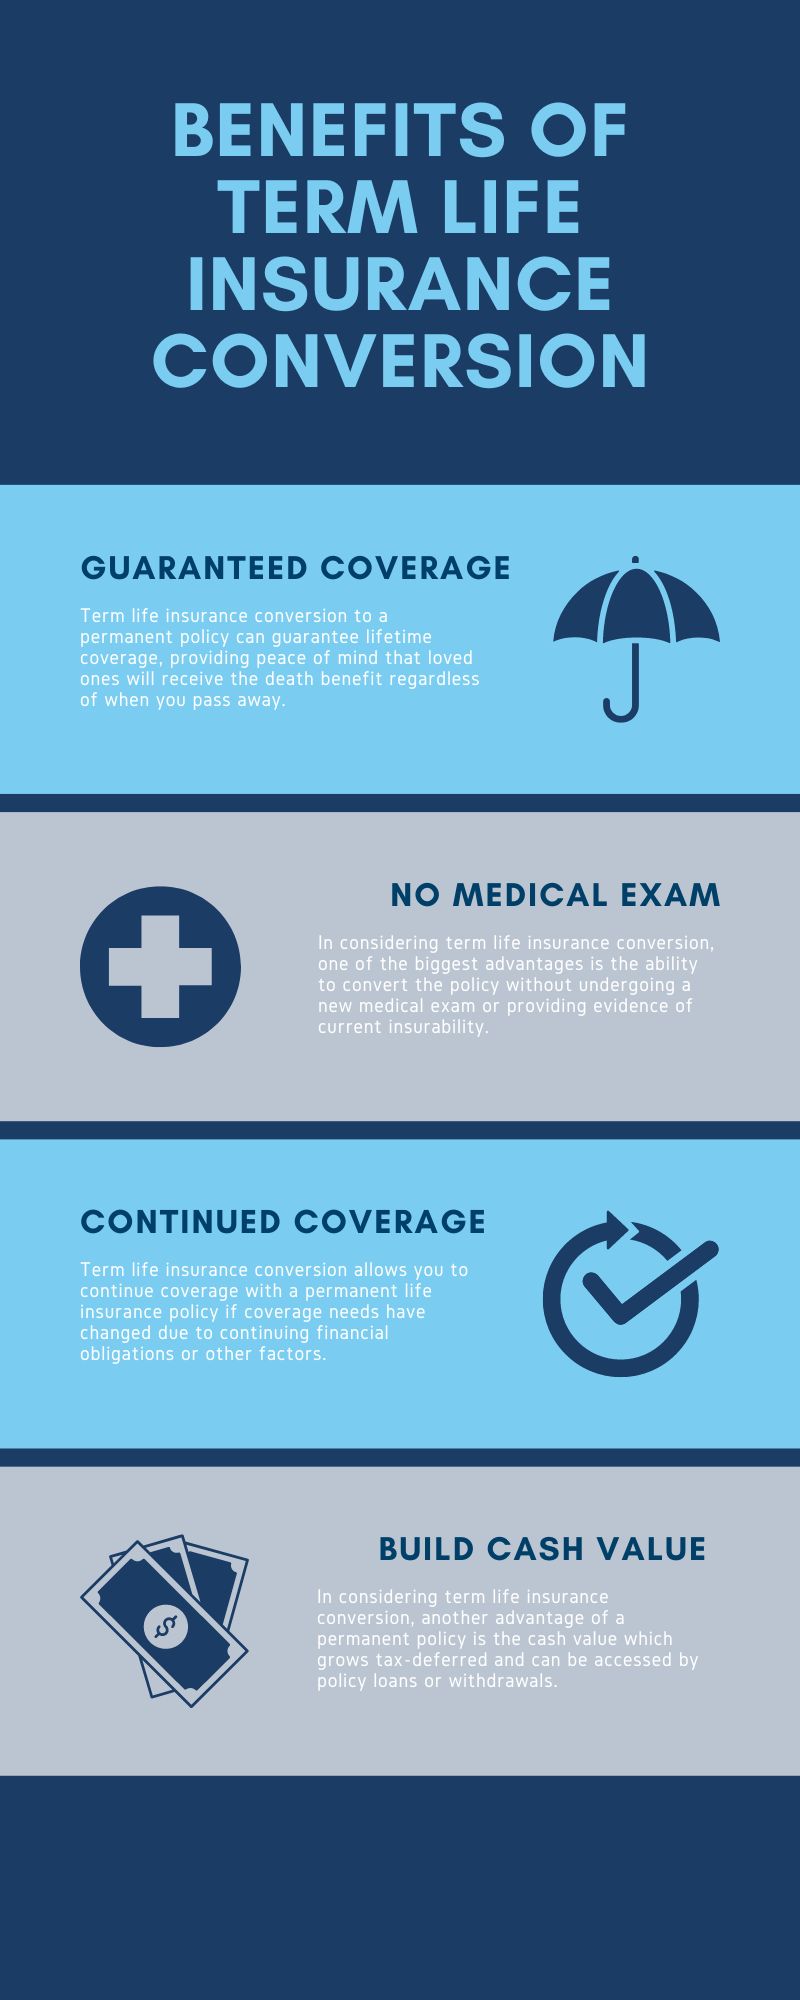 Benefits of Term Life Insurance Conversion infographic